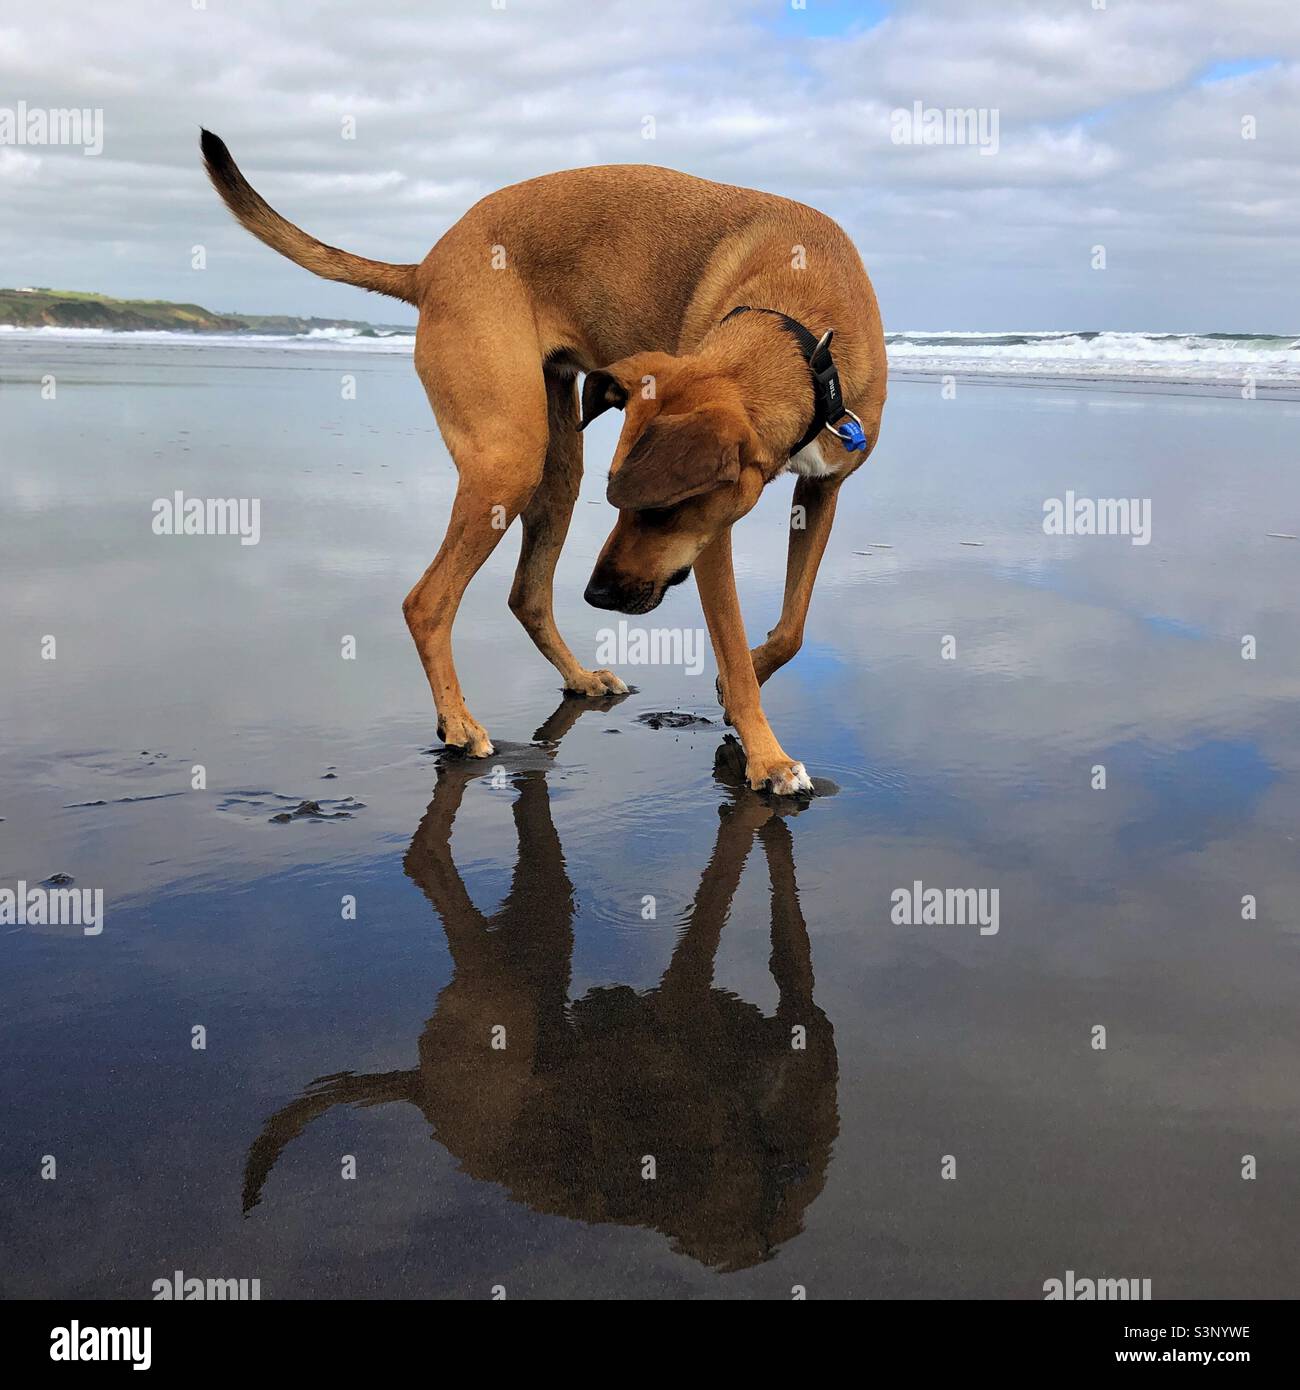 Dog spots own tail in reflection. Stock Photo